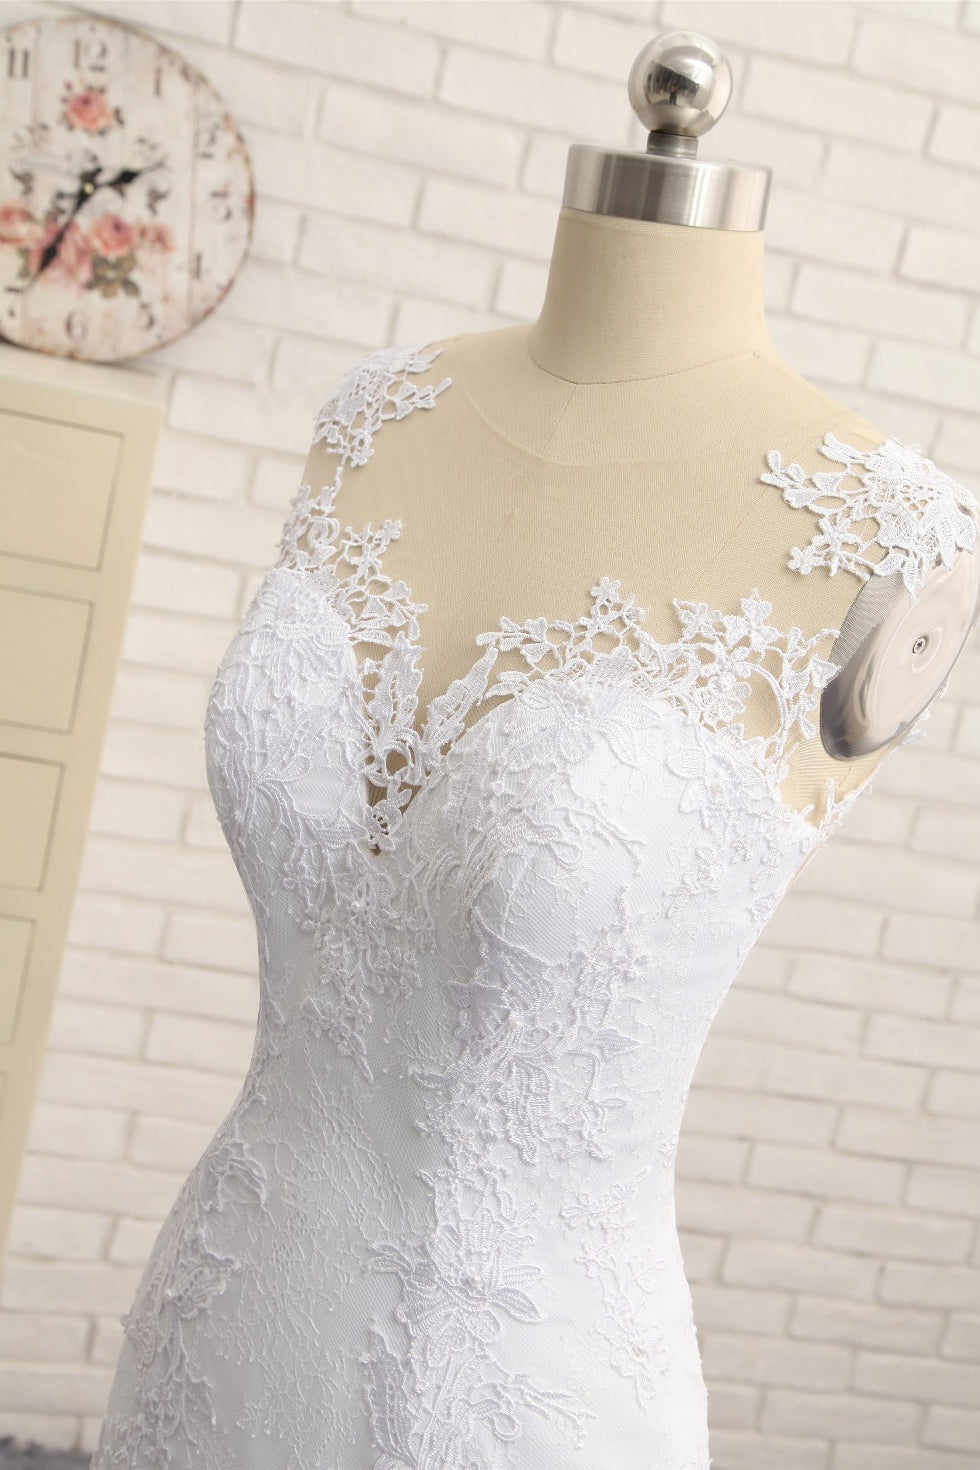 Stunning Jewel White Tulle Lace Wedding Dress Appliques Sleeveless Bridal Gowns On Sale-27dress